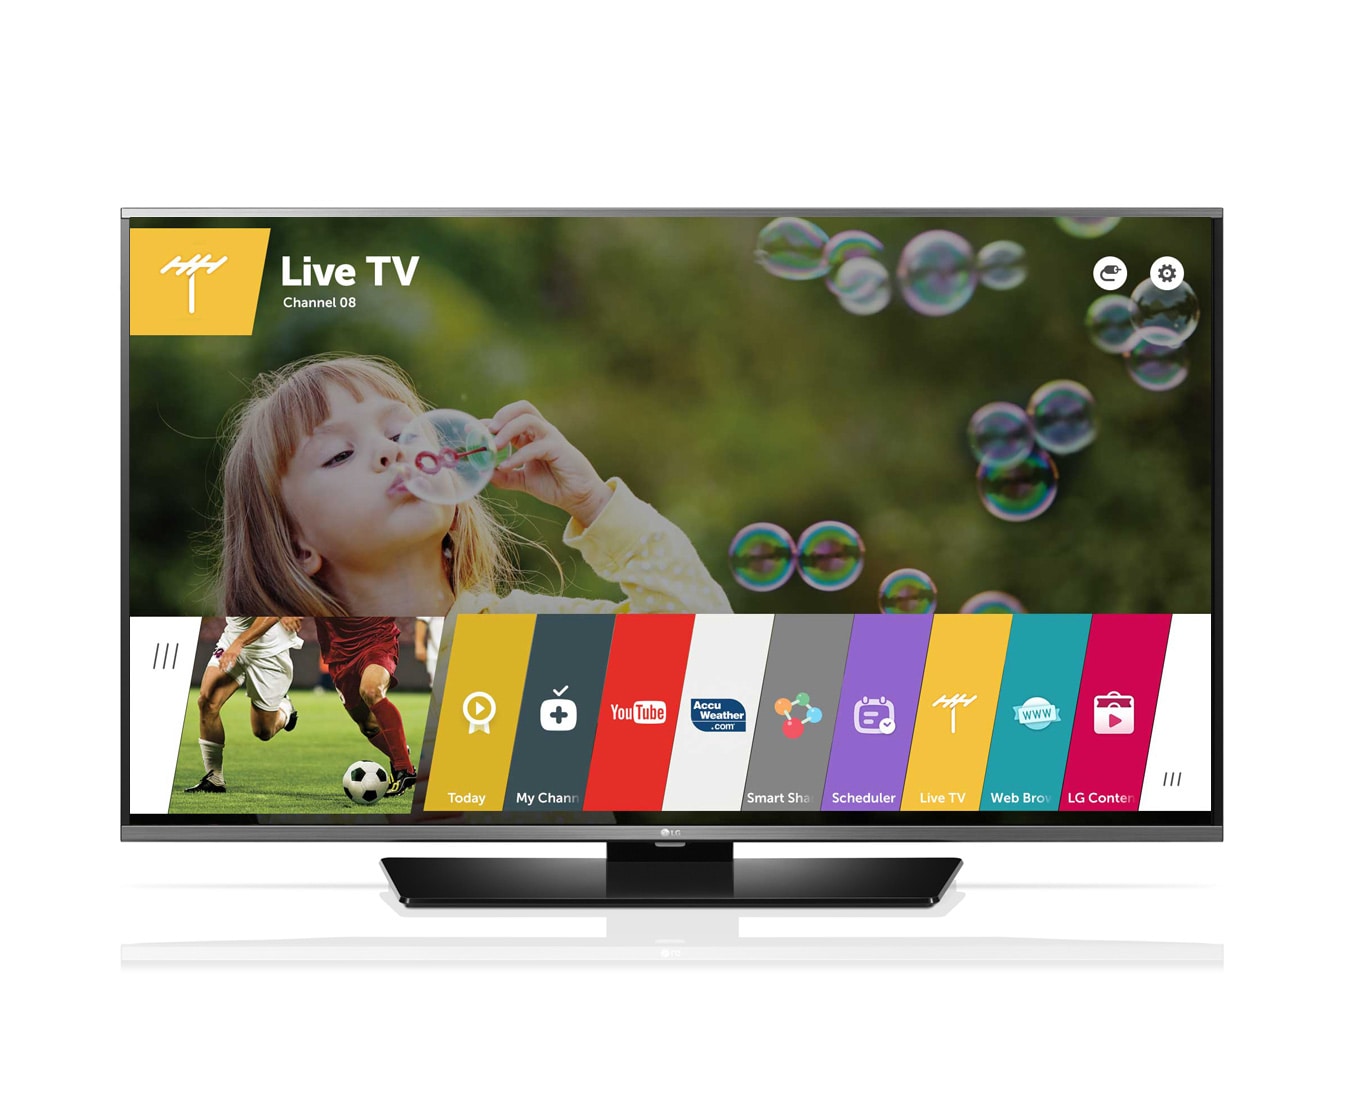 LG Smart TV with webOS 2.0, 49LF6300